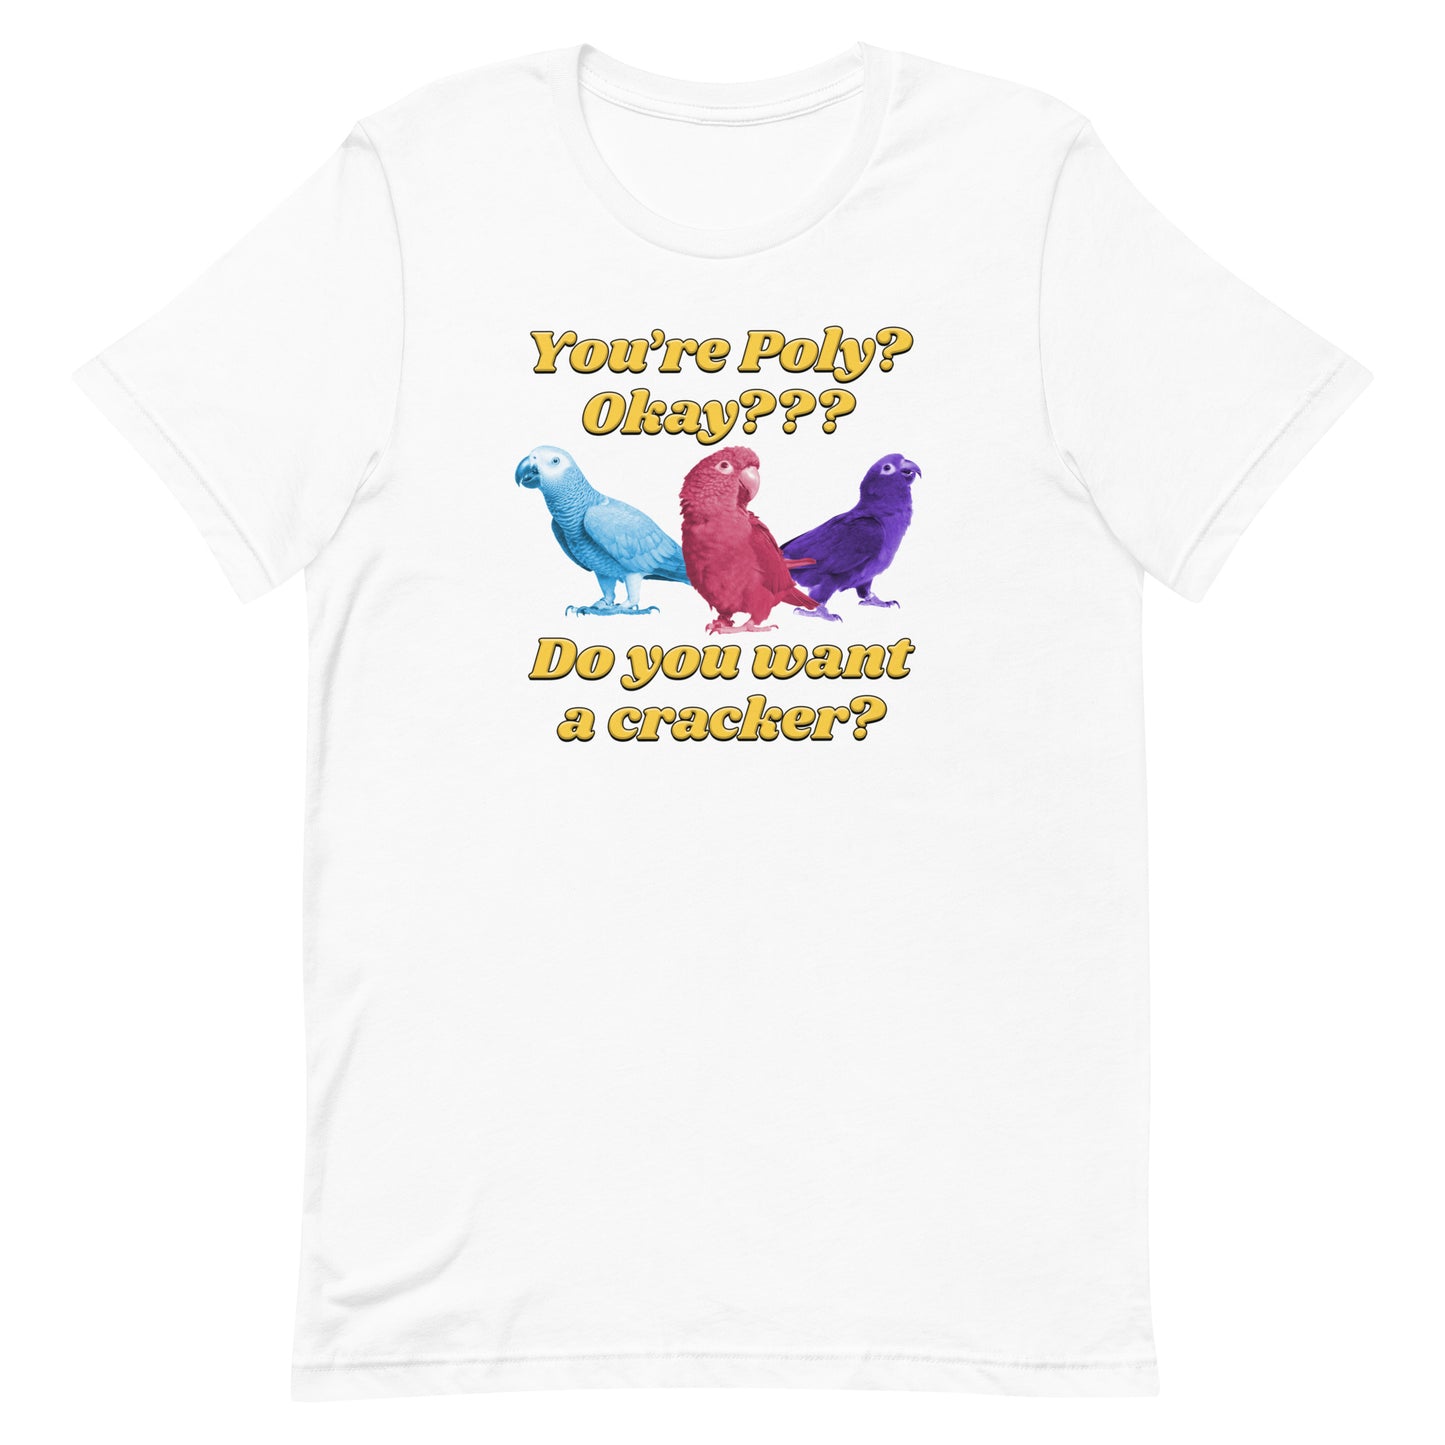 You're Poly? Do You Want a Cracker? Unisex t-shirt